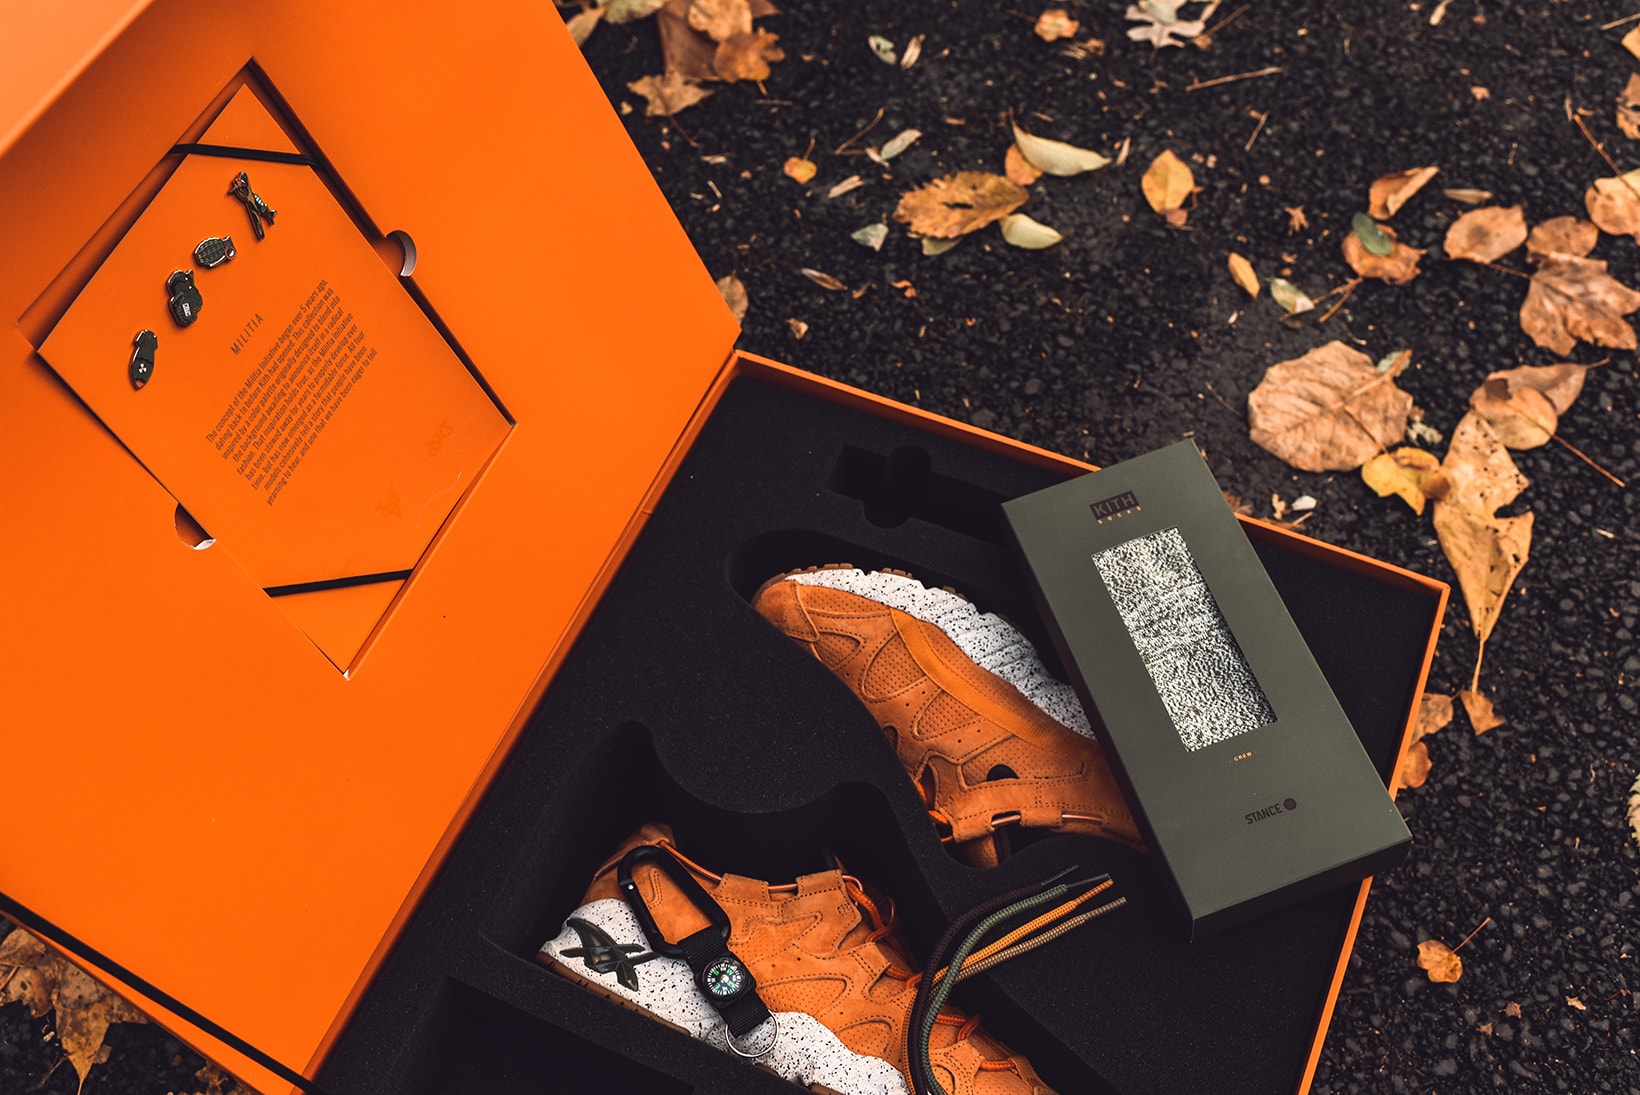 KITH Reveals Legends Day Collaboration Ronnie Fieg ASICS